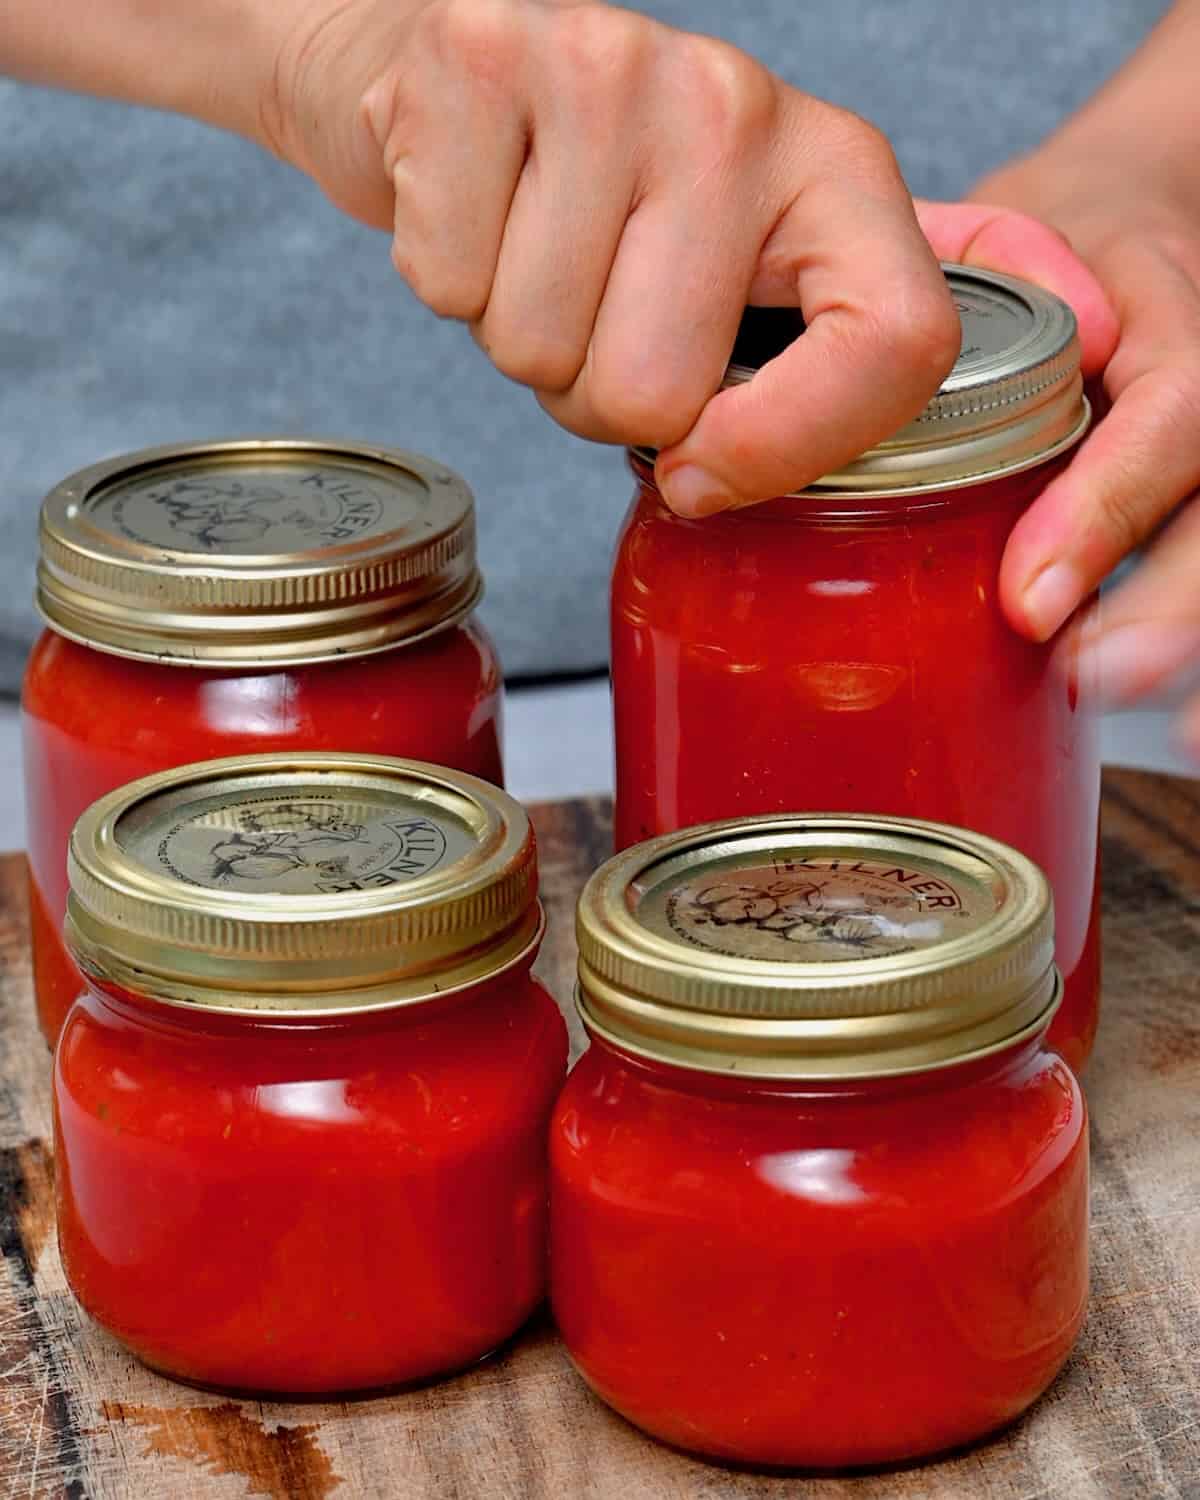 Closing a jar with homemade pizza sauce